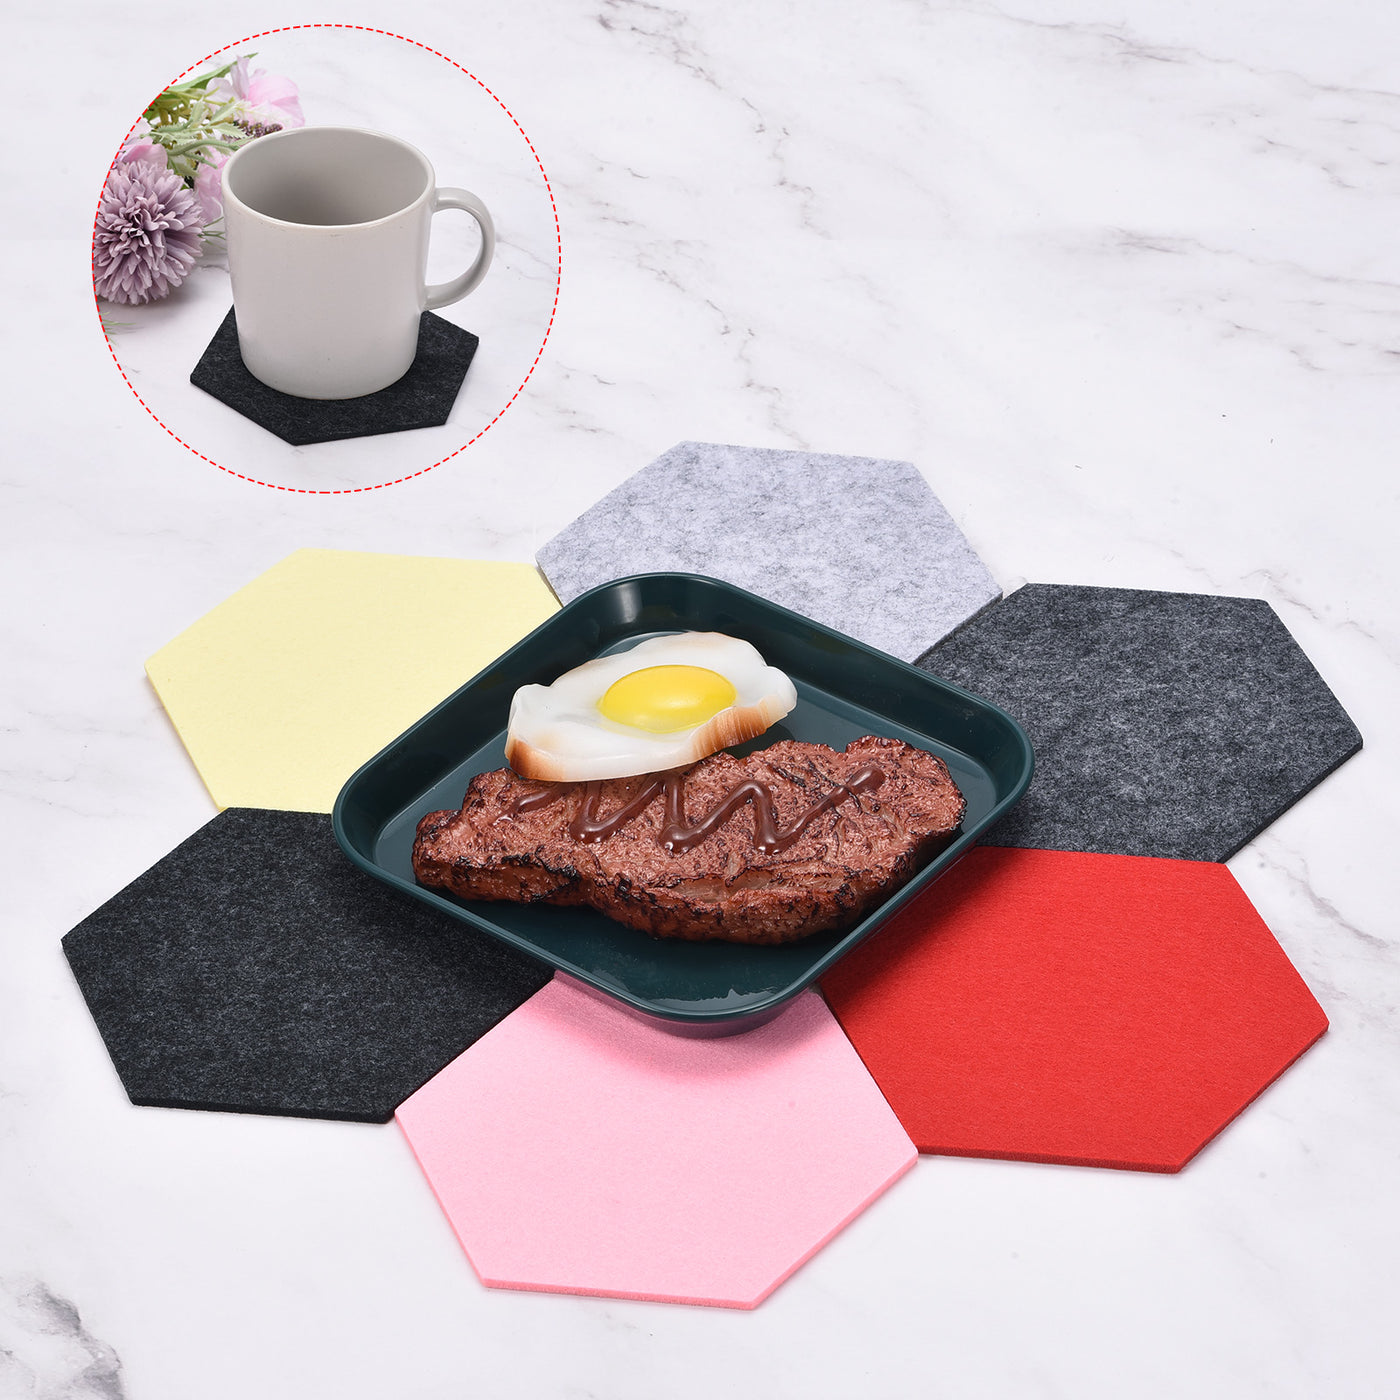 uxcell Uxcell Felt Coasters 4pcs Absorbent Pad Coaster for Drink Cup Pot Bowl Vase Gray